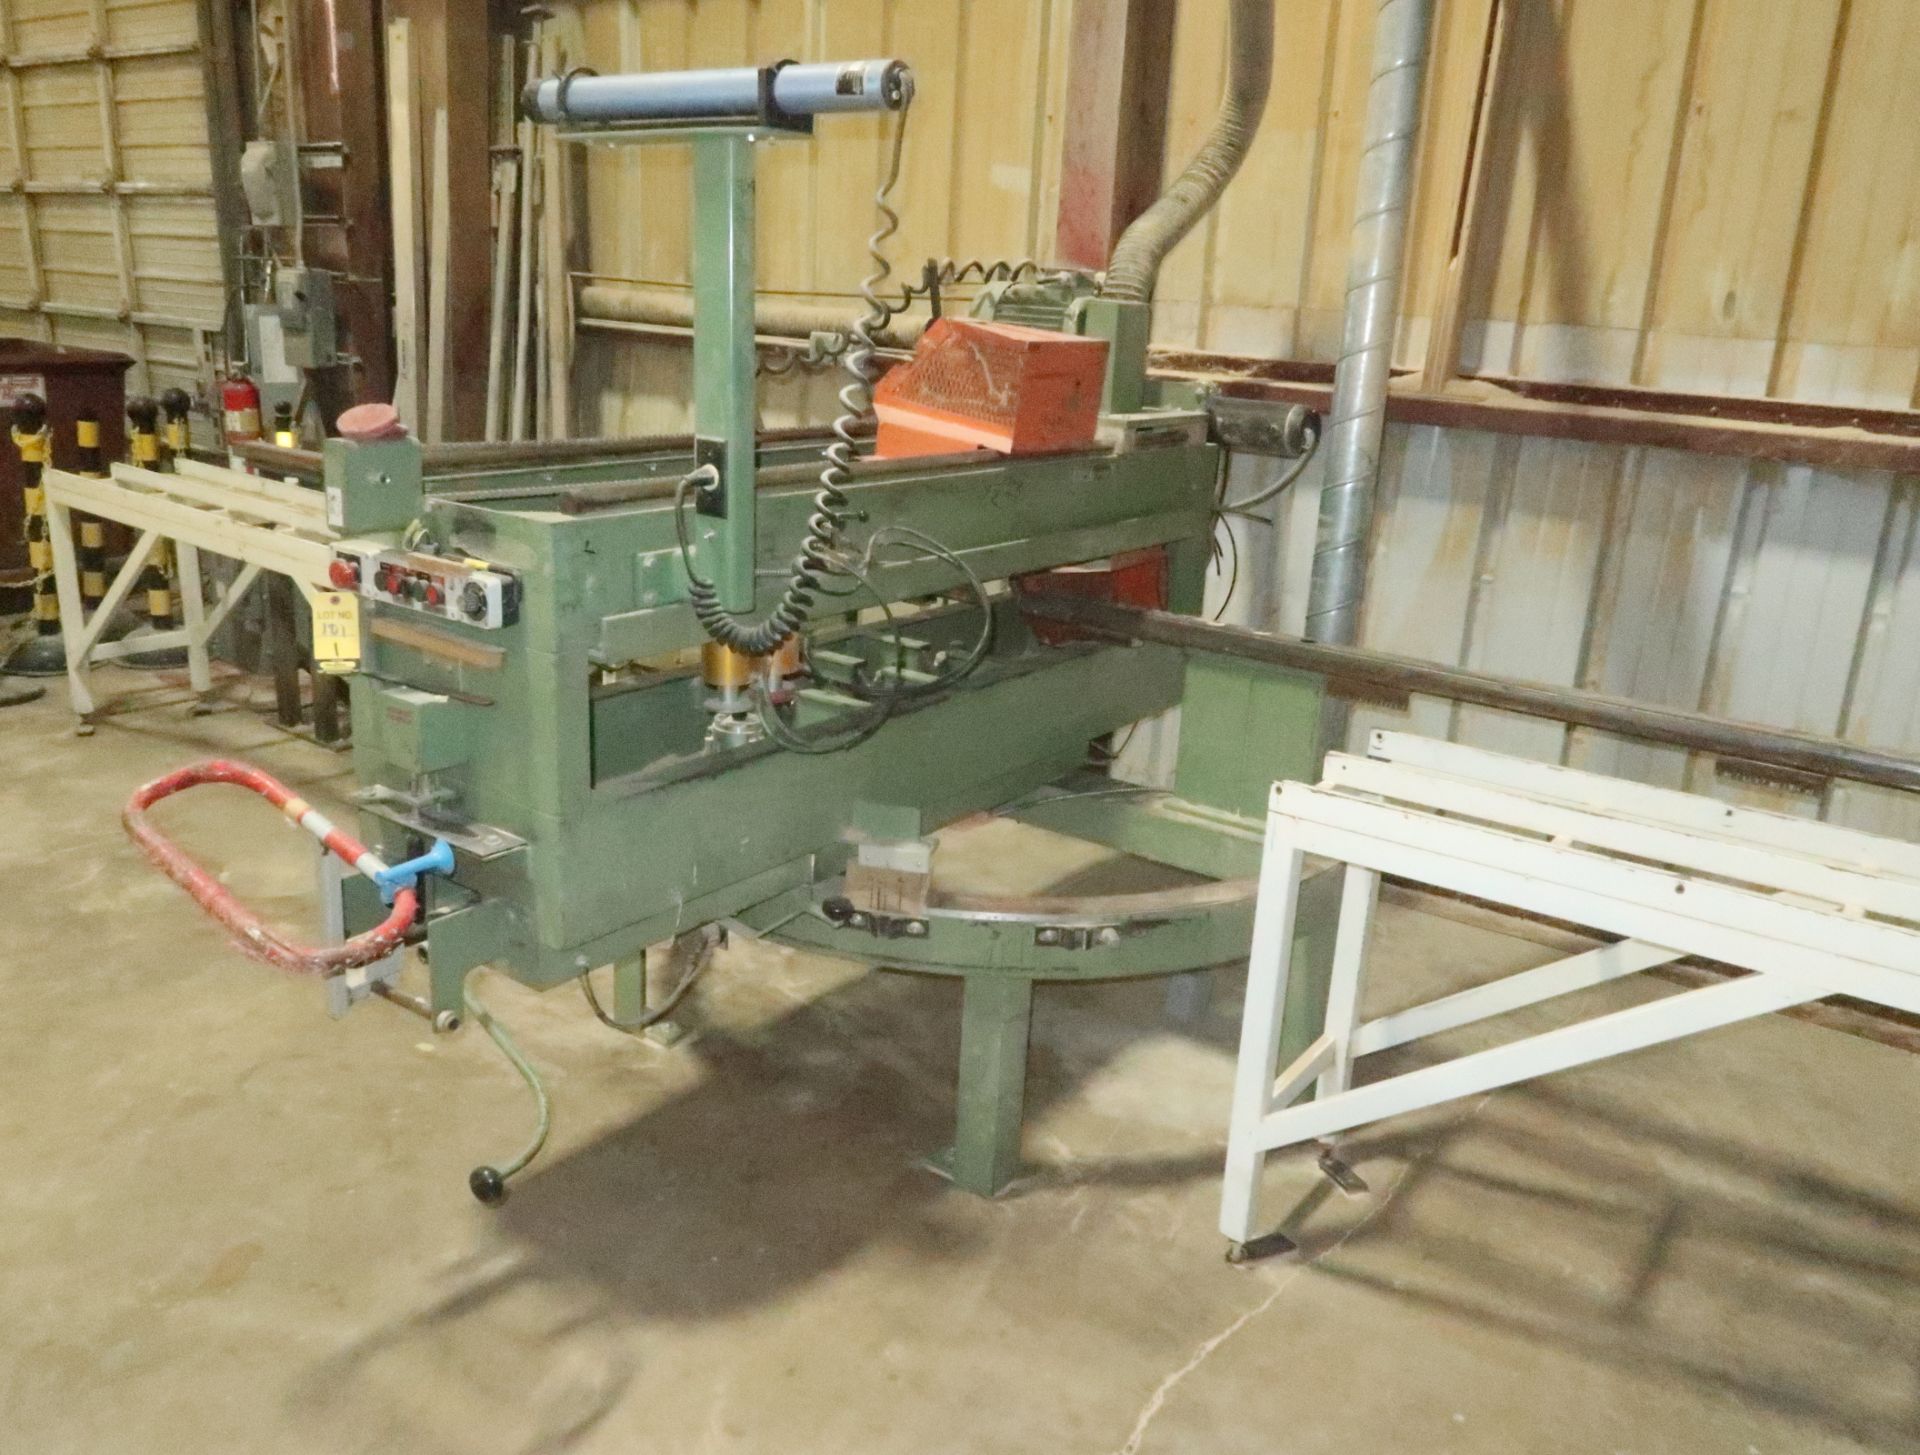 MIDWEST AUTOMATION MDL. 5033 COUNTERTOP SAW, SN. 926-85121, 13419 HRS.